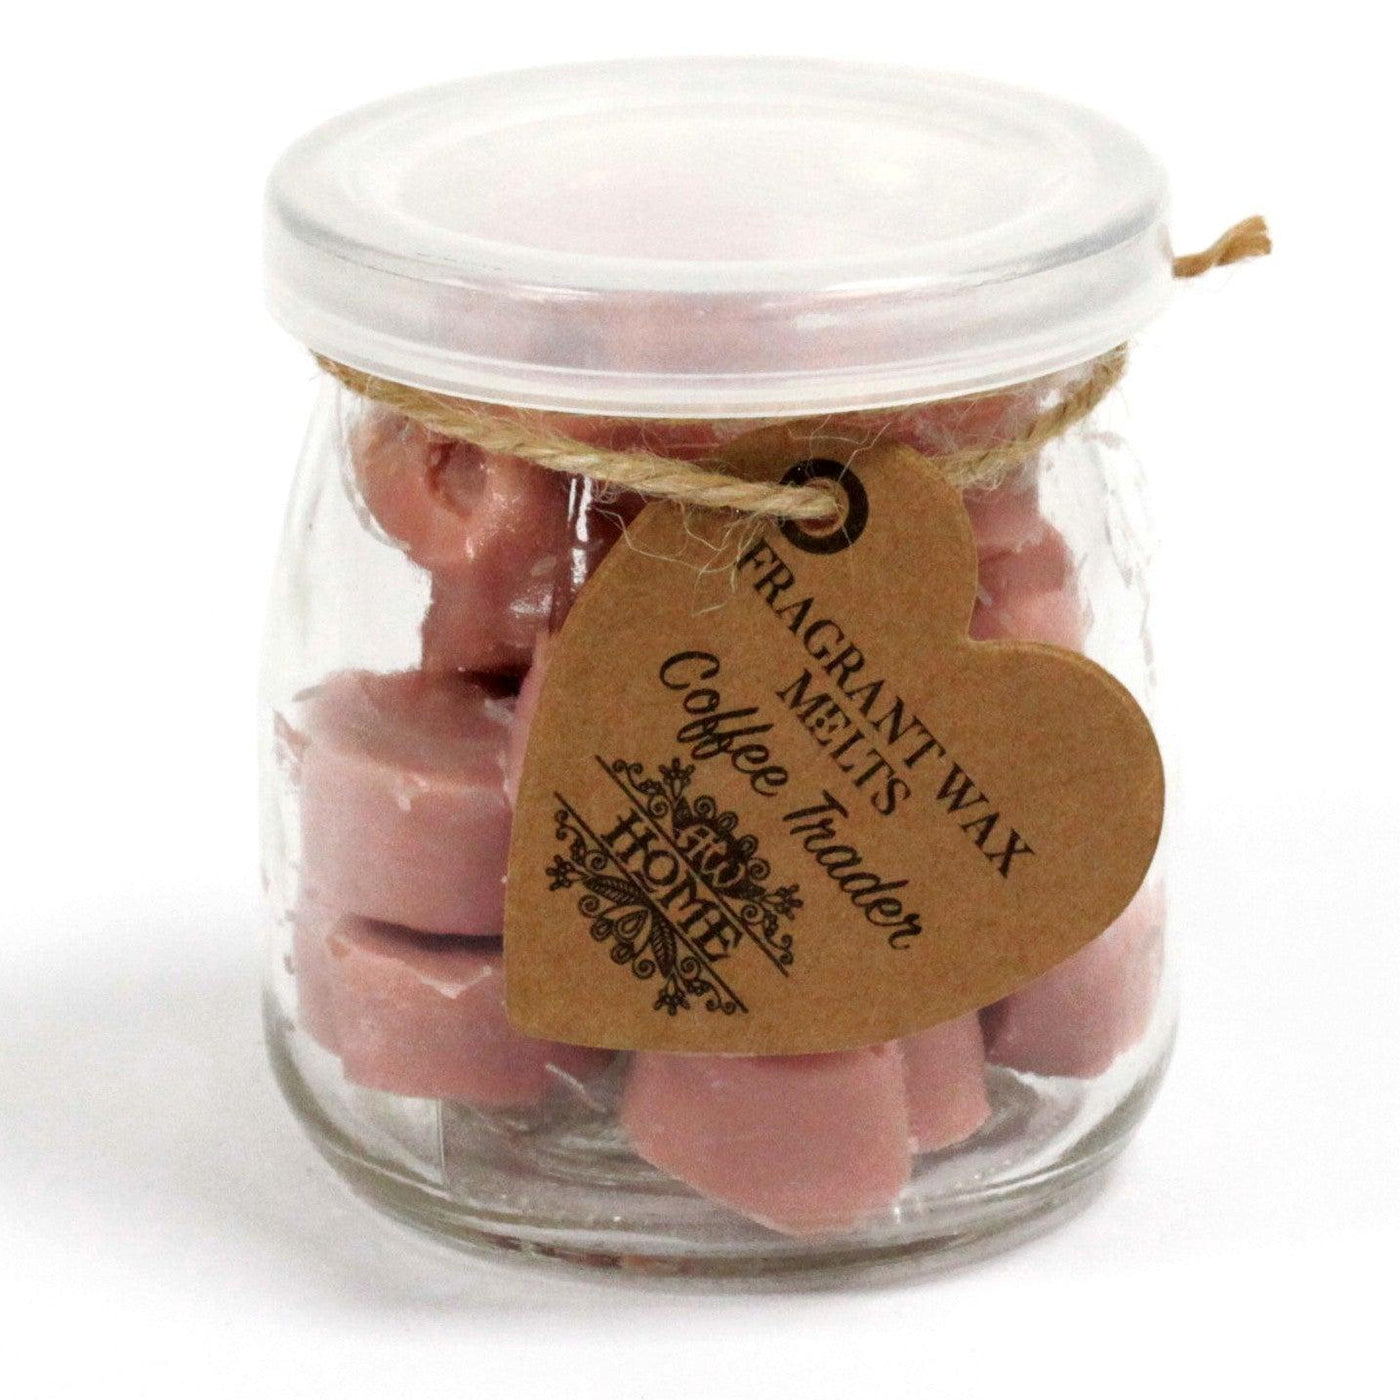 Natural Soy Fragrance Oil Heart Wax Melts - Coffee Trader.